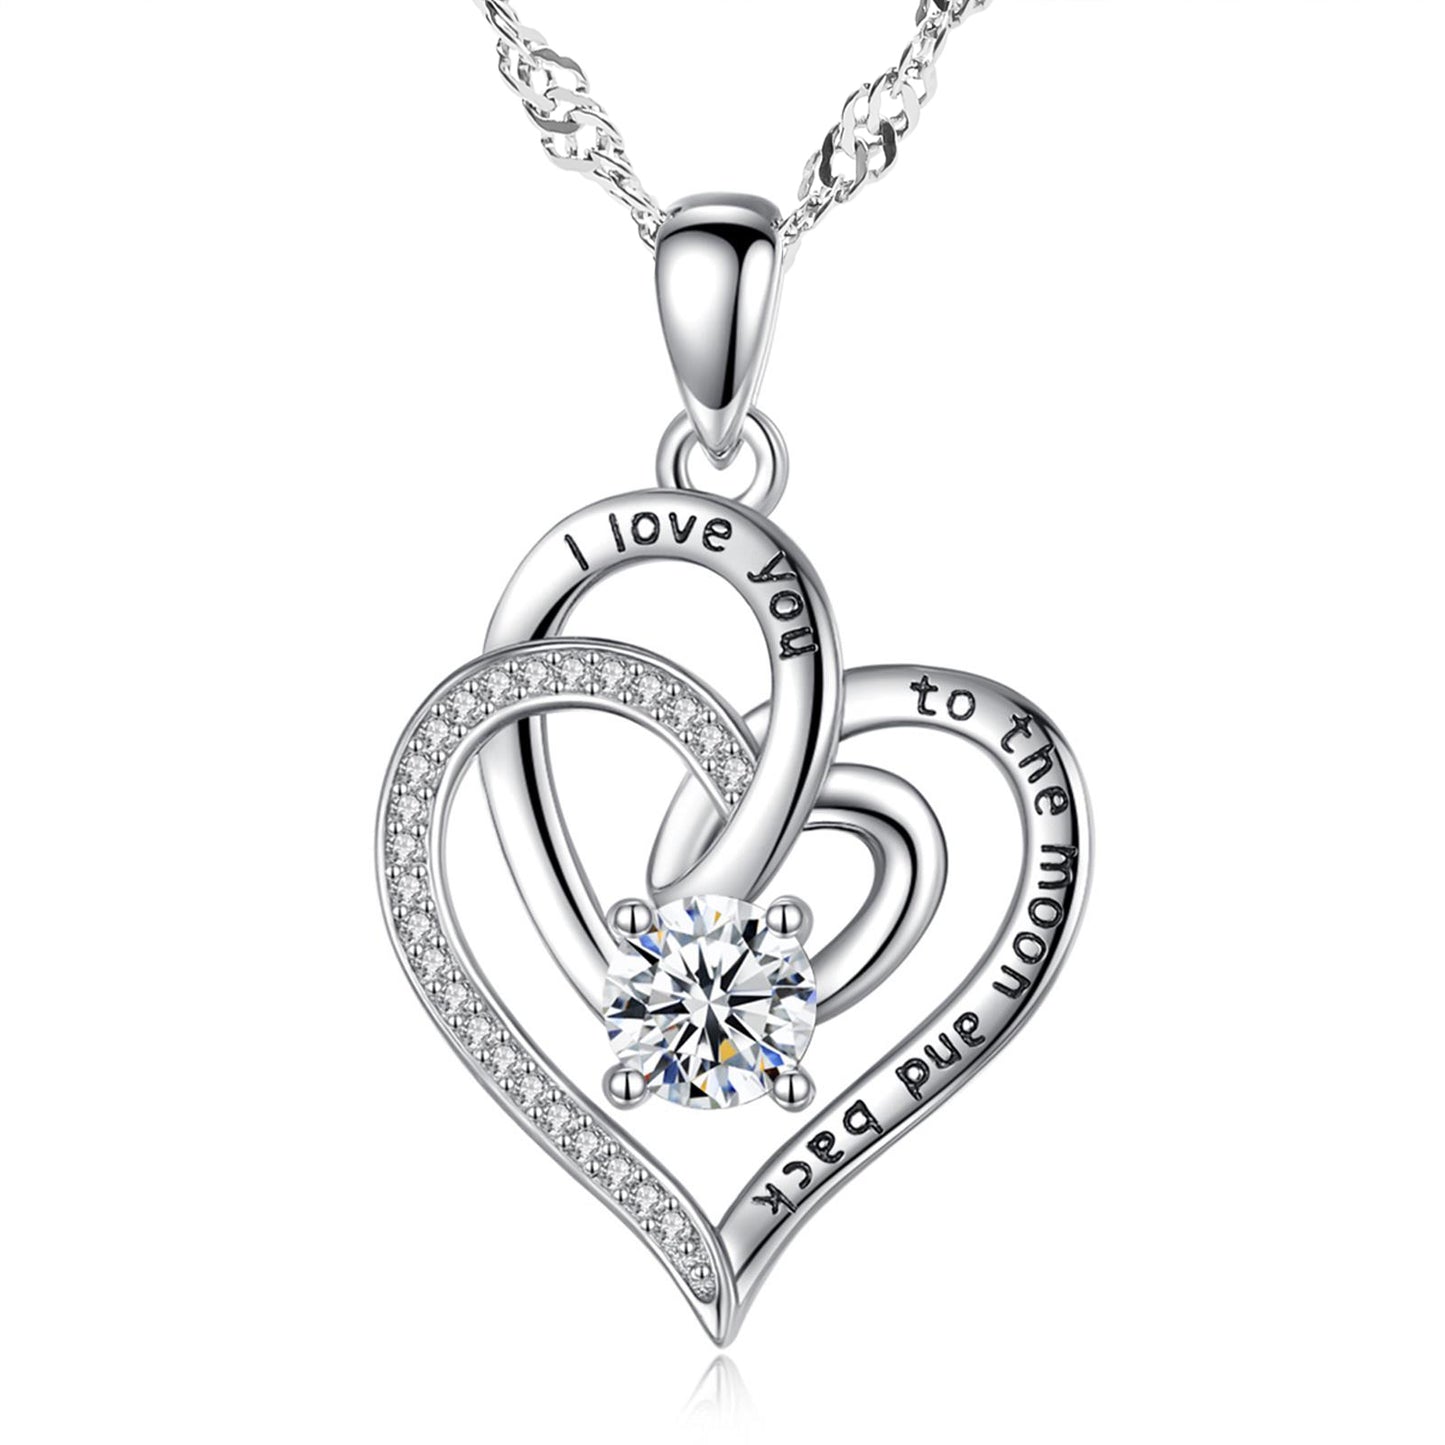 Double Love Heart Engraved Pendant with water wave necklace chain 18"